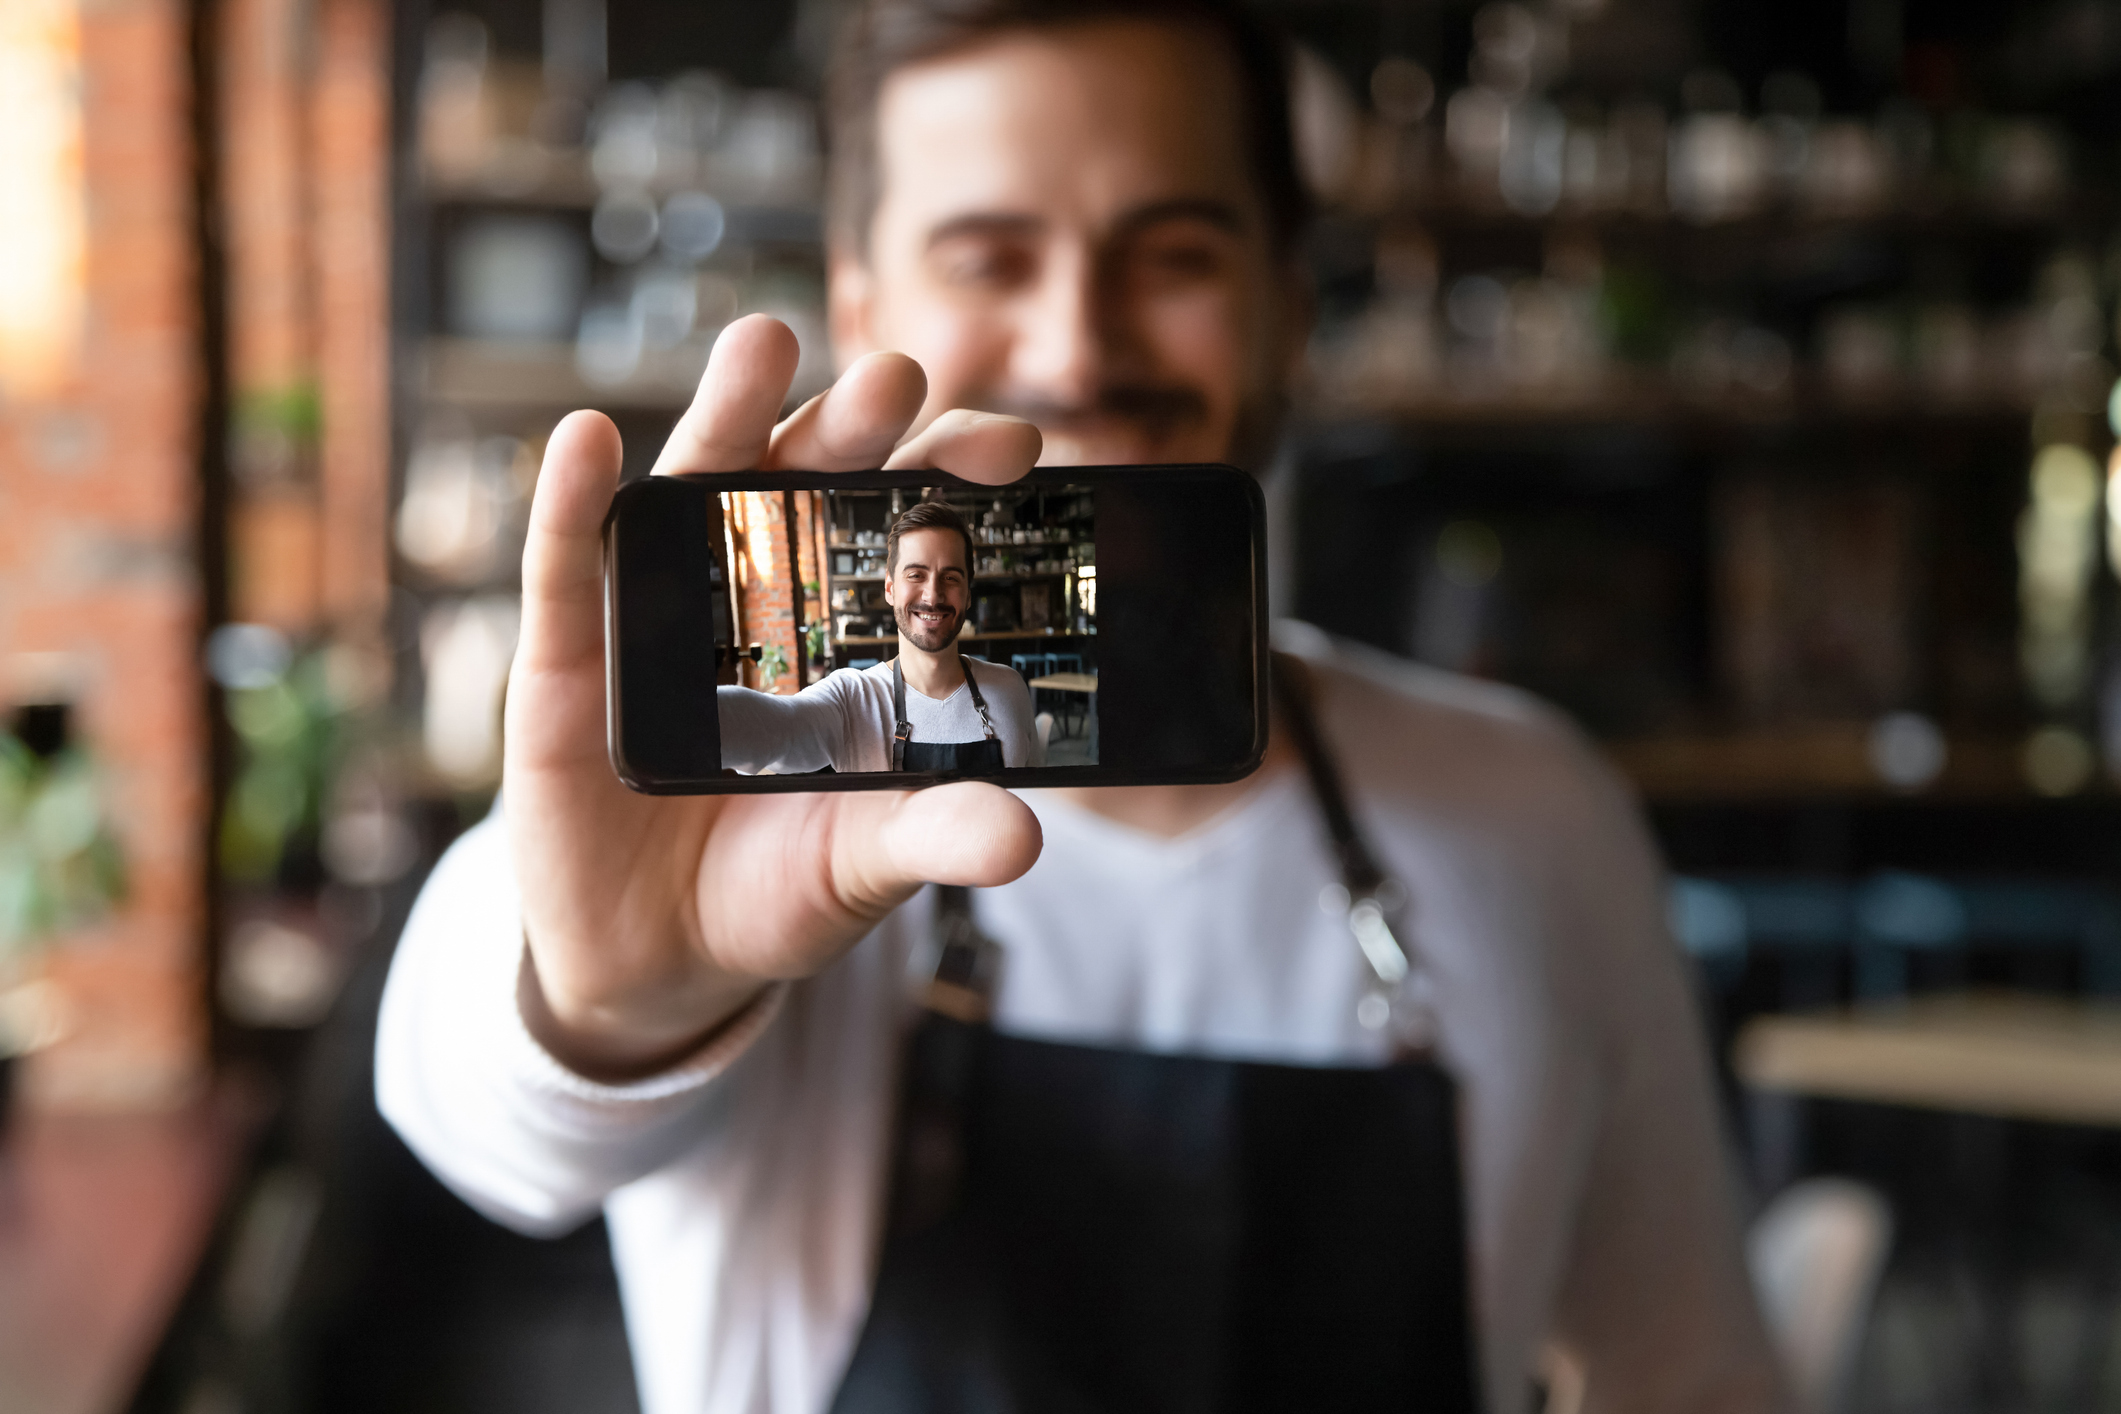 Happy man wearing apron holds smartphone with camera on, waiter or cafe owner make selfie photo focus on device with self portrait image on mobile screen, share life in social media having fun concept